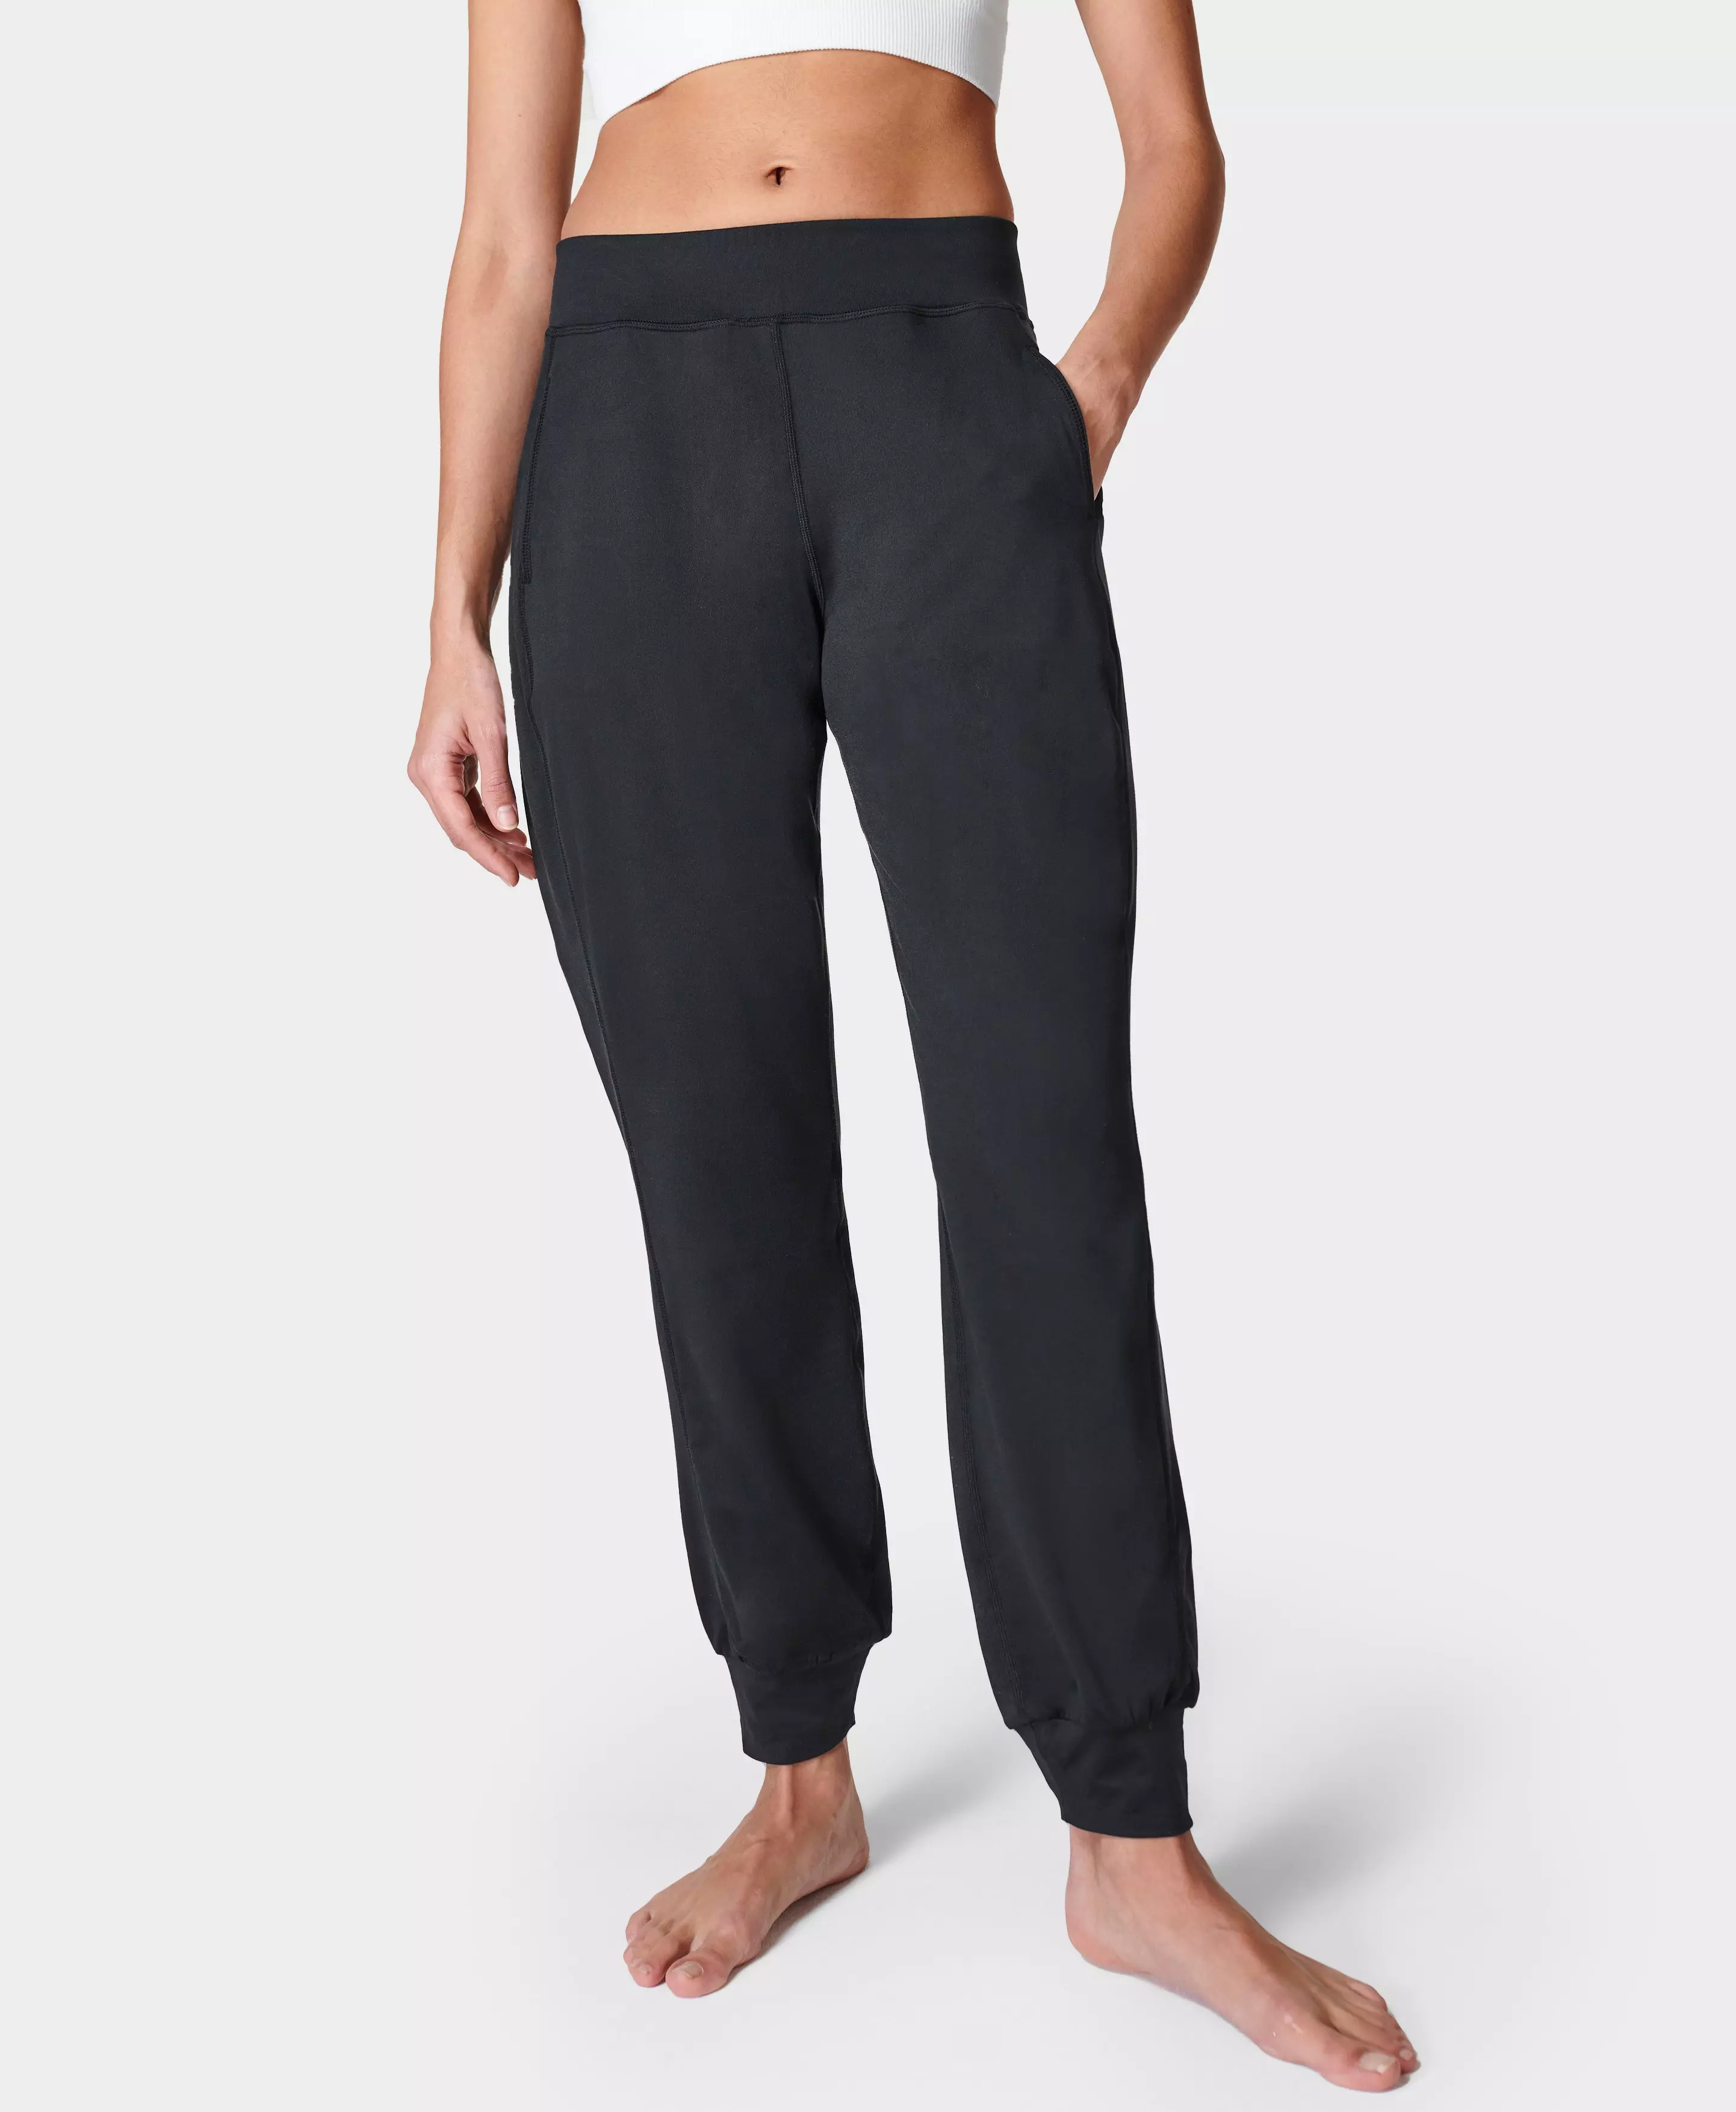 zaps - Black Cotton Blend Women's Yoga Trackpants ( Pack of 1 ) - Buy zaps  - Black Cotton Blend Women's Yoga Trackpants ( Pack of 1 ) Online at Best  Prices in India on Snapdeal